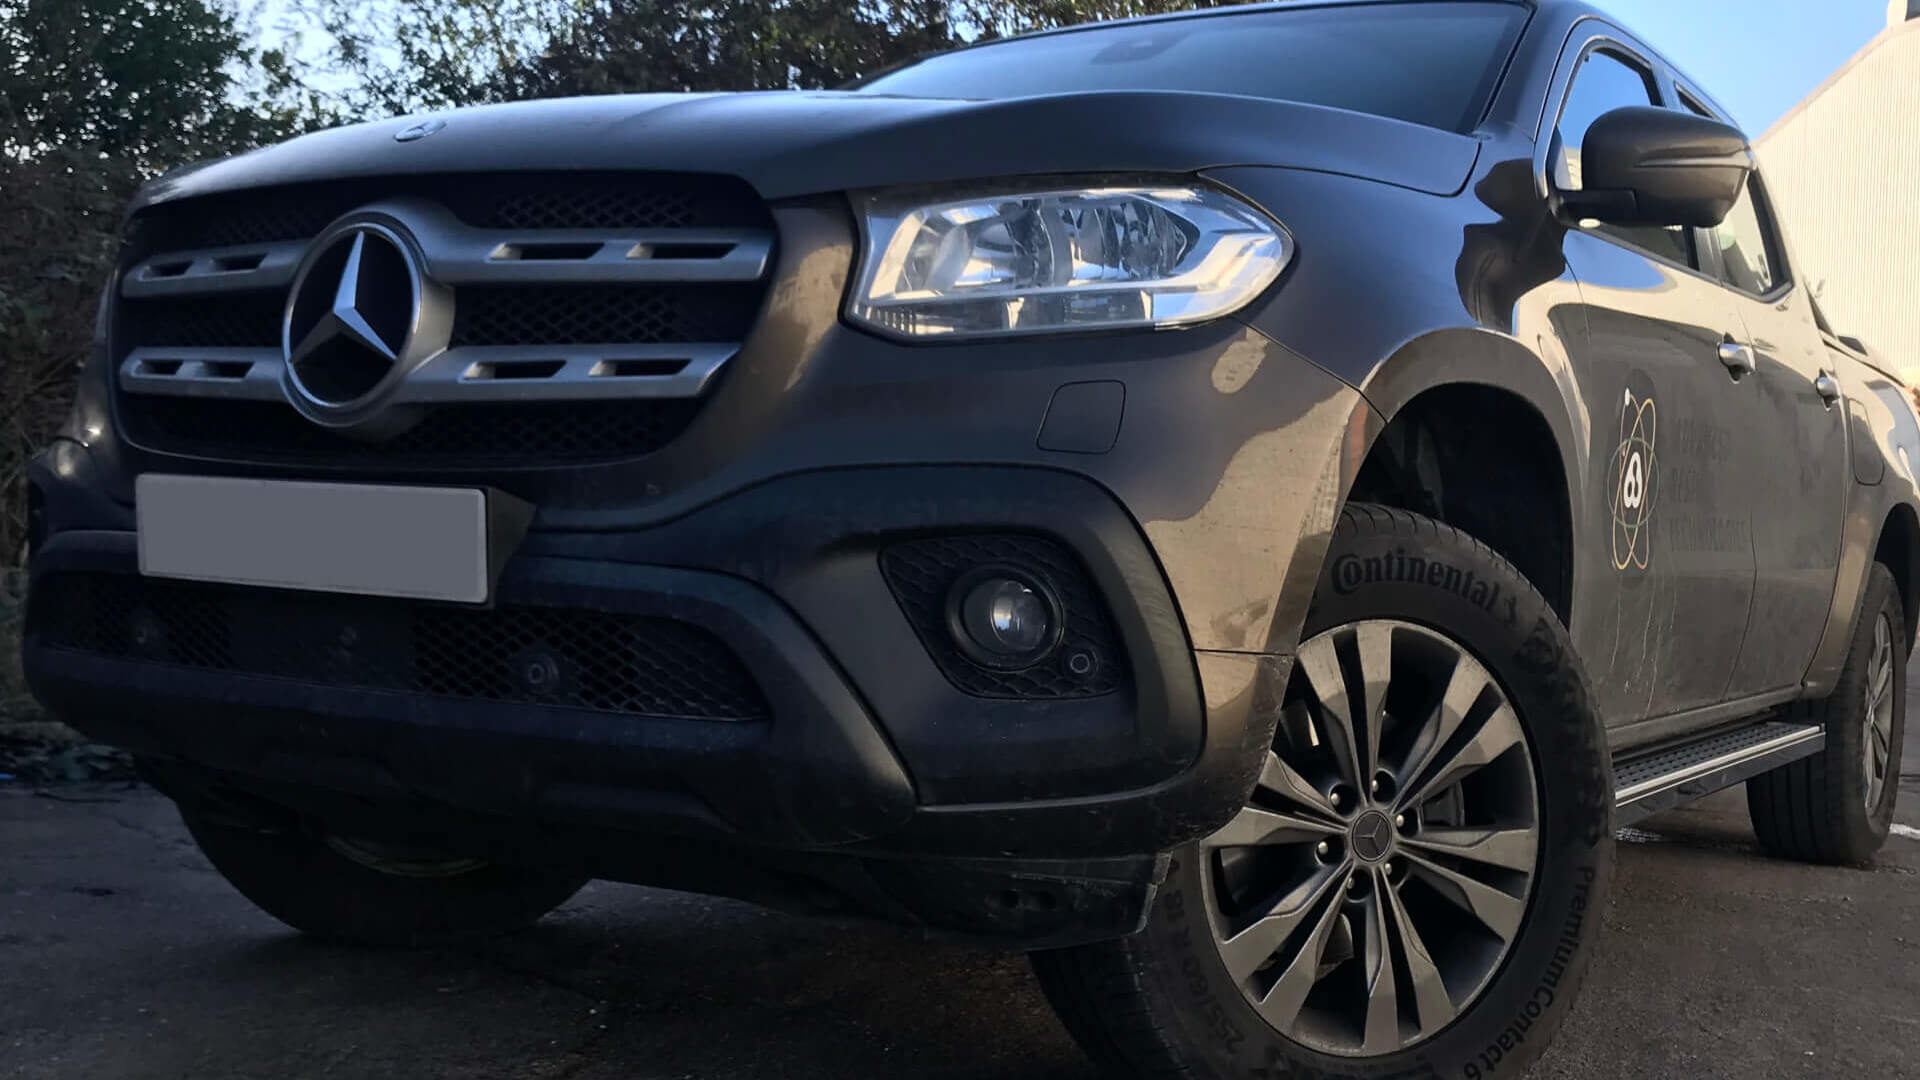 Direct4x4 Accessories for Mercedes Benz X-Class Vehicles